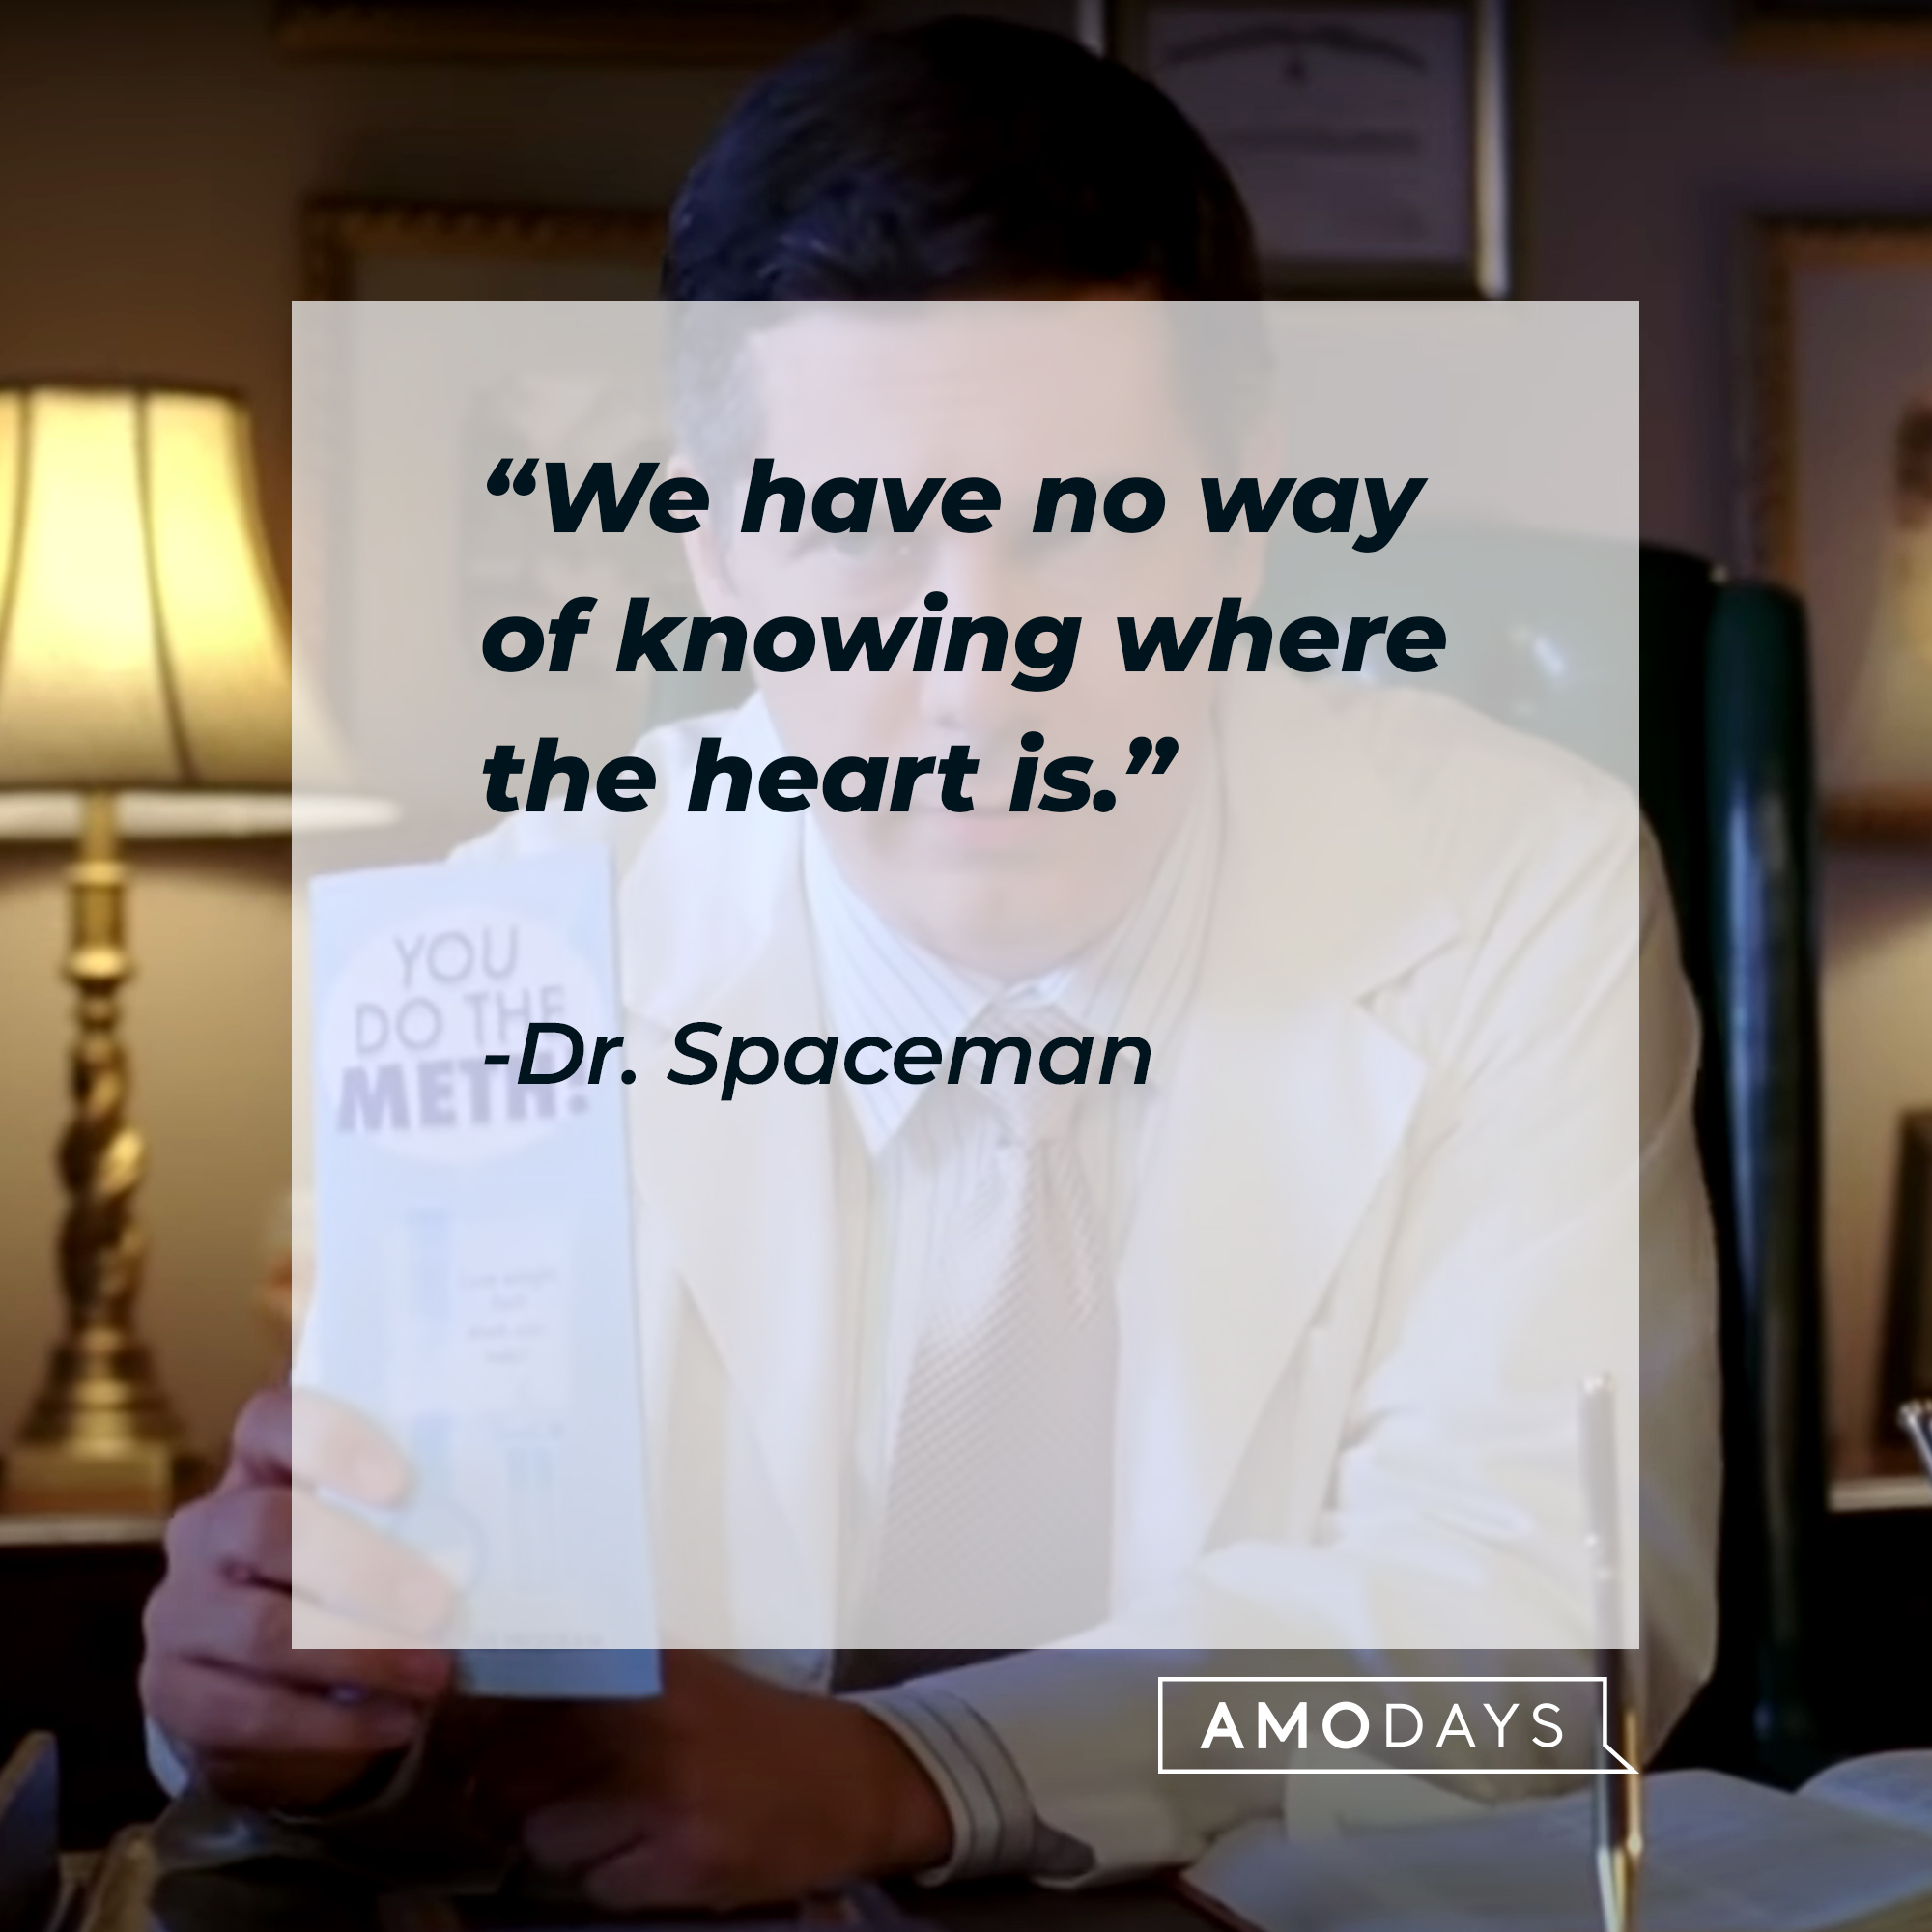 Dr. Spaceman's quote: "We have no way of knowing where the heart is." | Source: youtube.com/30Rock